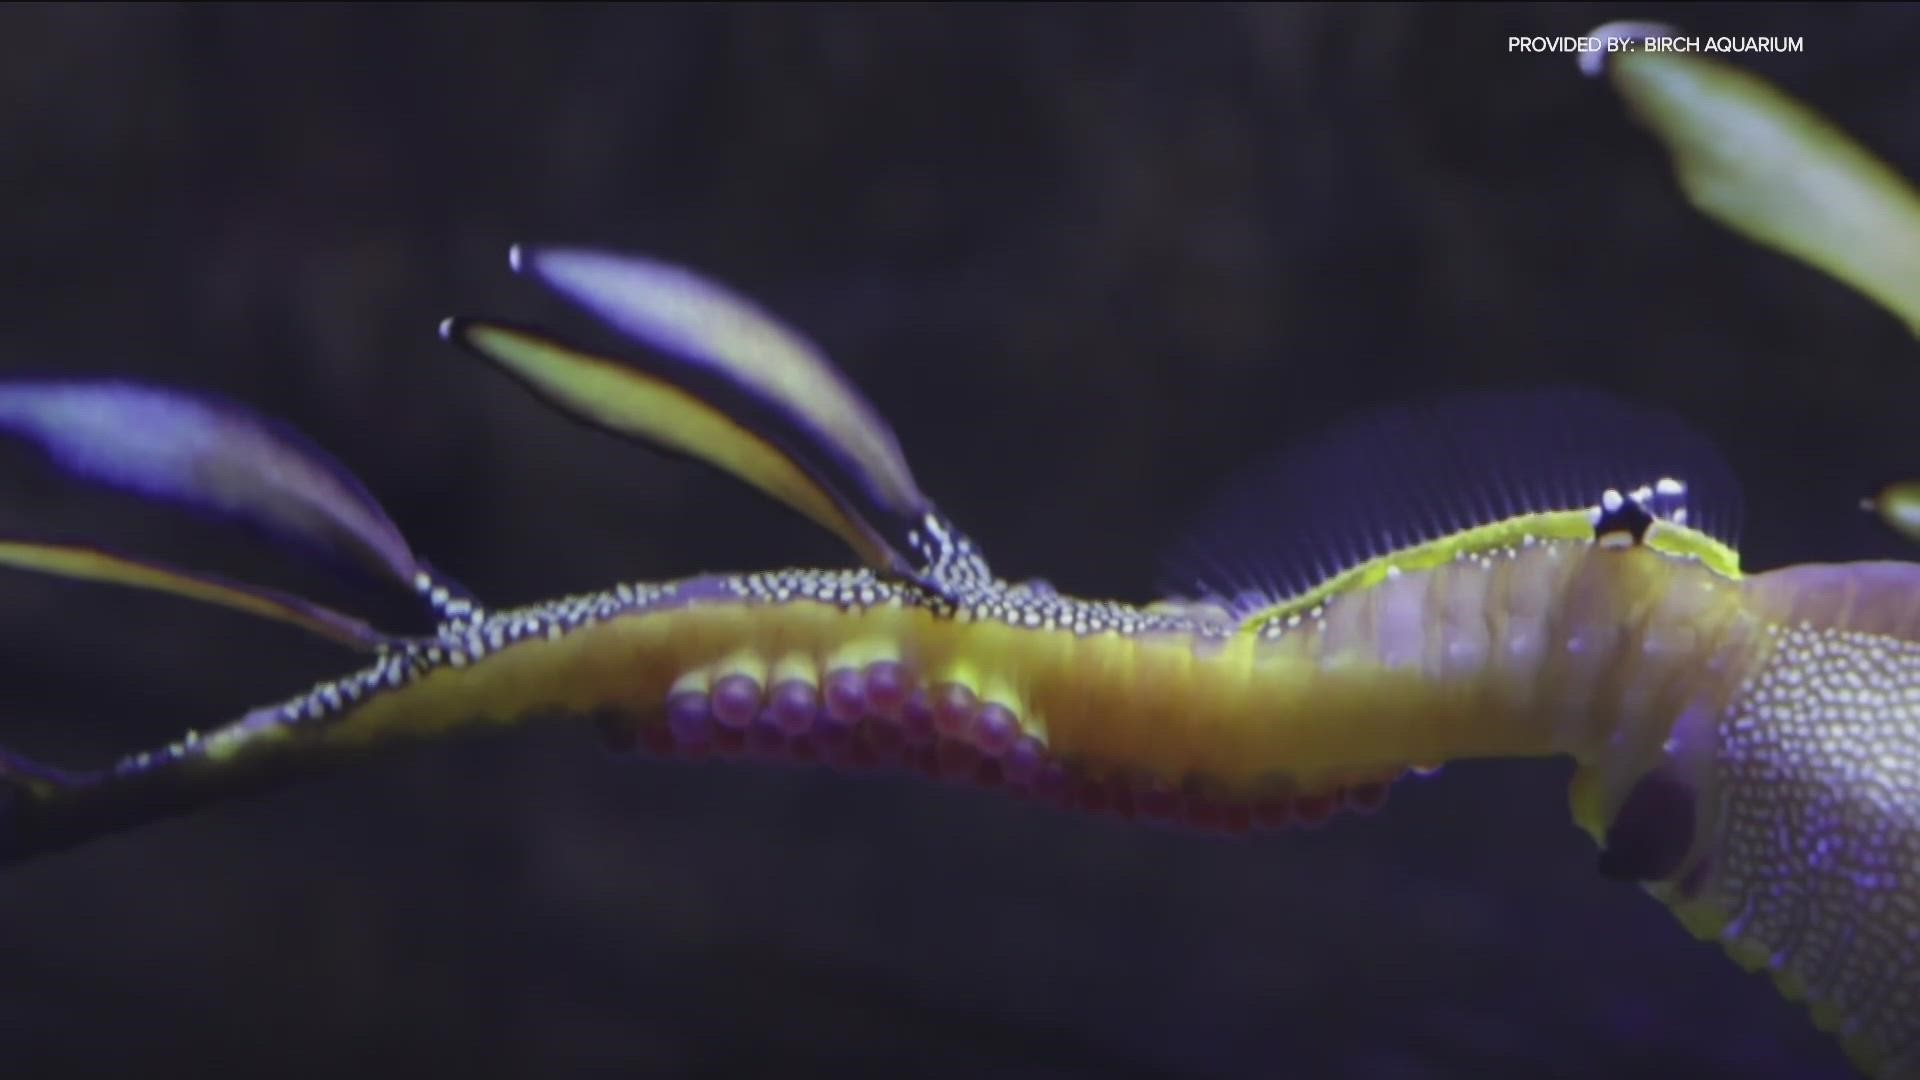 Birch Aquarium at Scripps Institution of Oceanography is celebrating the arrival of more than 70 tiny newborn weedy seadragons, which are difficult to breed.